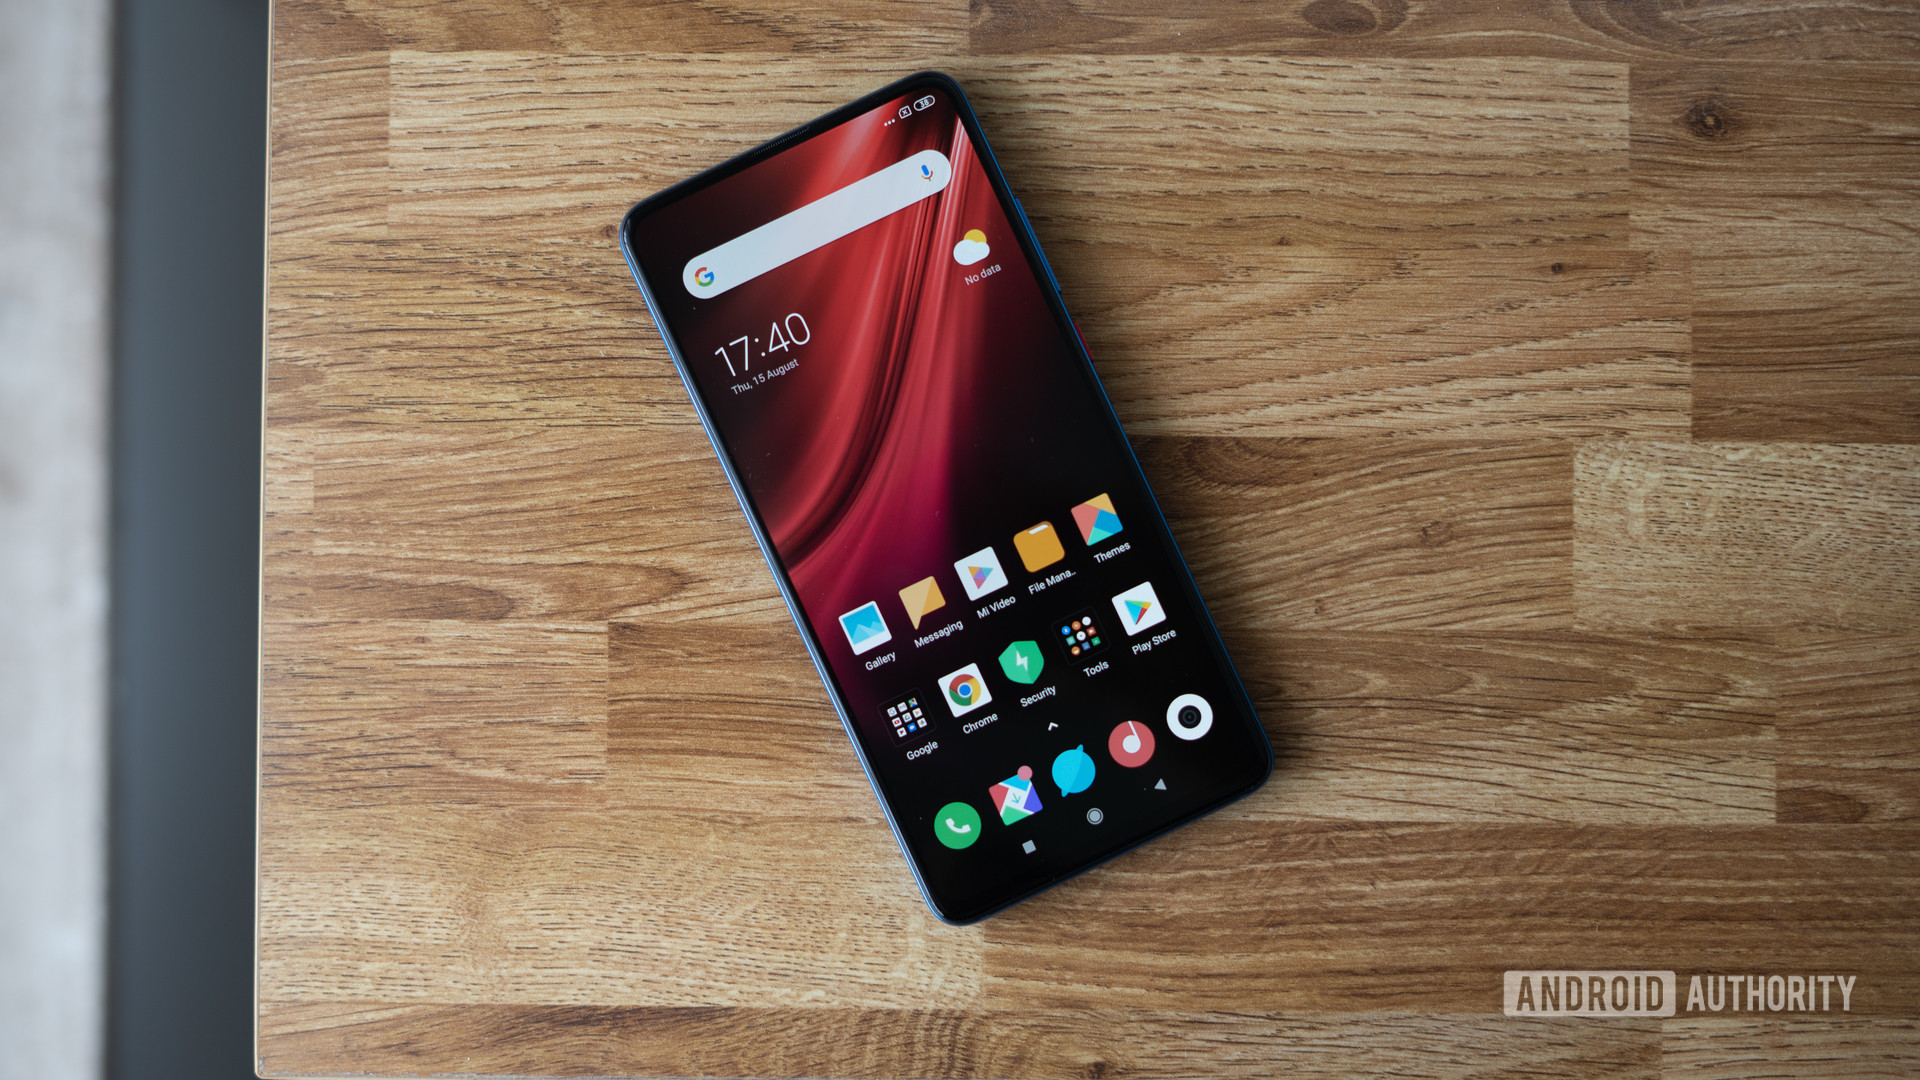 Redmi K20 showing front display and homescreen